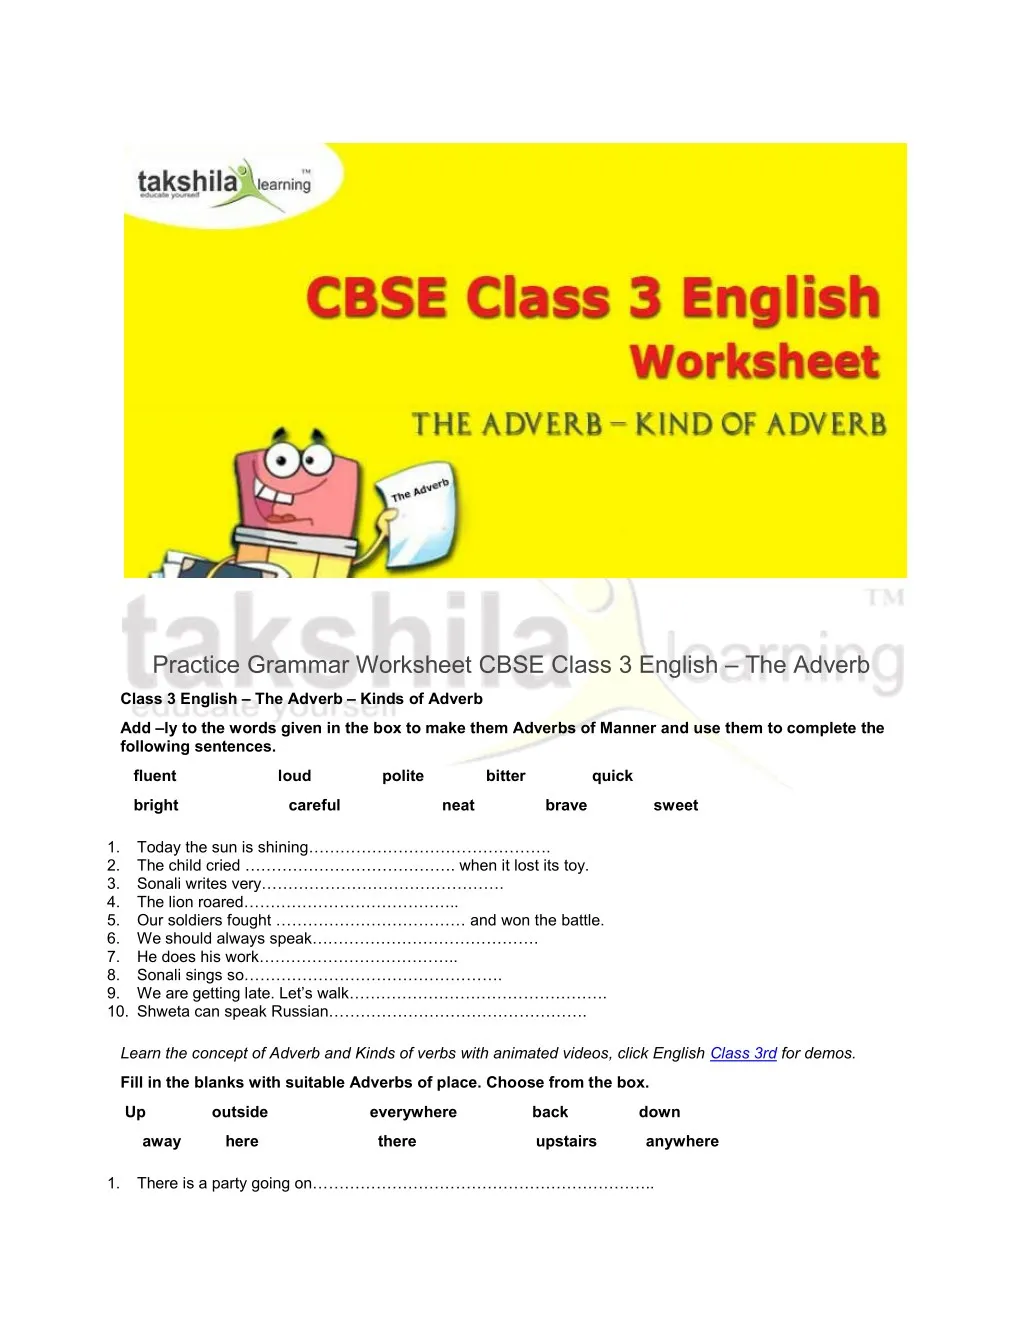 ppt-practice-grammar-worksheet-for-cbse-class-3-english-the-adverb